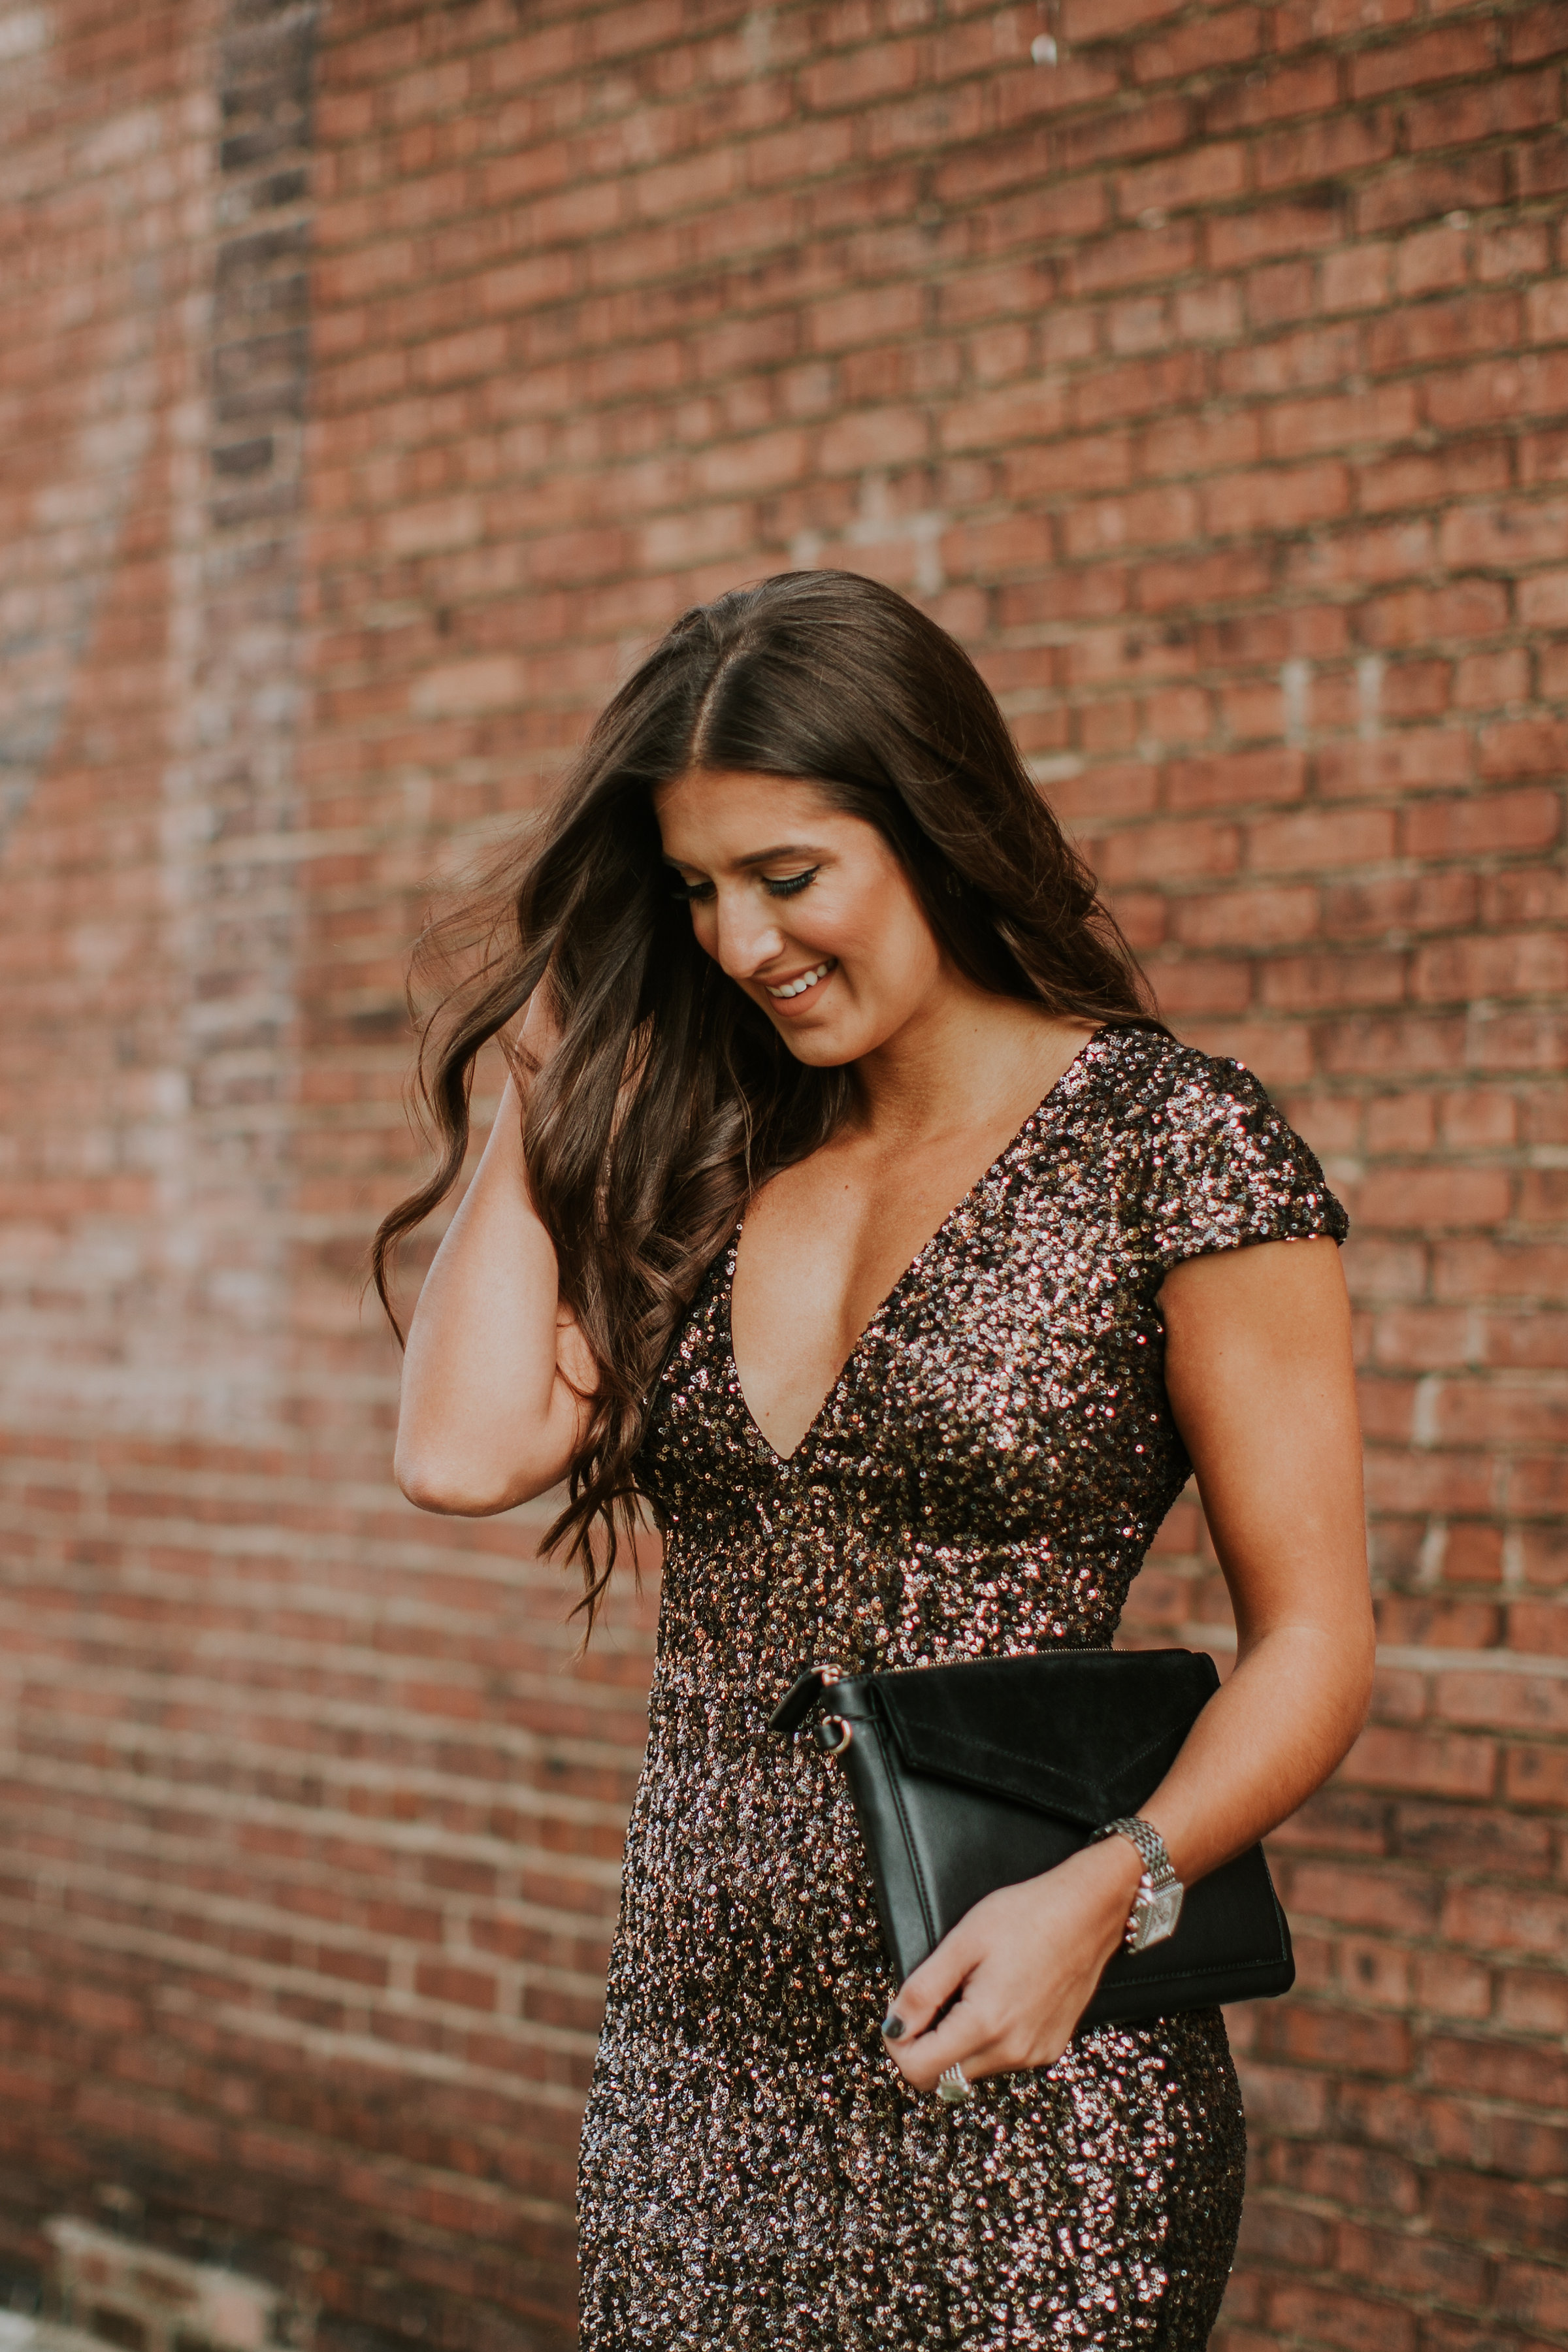 gold sequin dress, new years outfit, new years sequin dress, new years eve outfit, sequin mini dress, holiday sequin dress, sequin cocktail dress, holiday style, christmas cocktail party outfit // grace wainwright a southern drawl